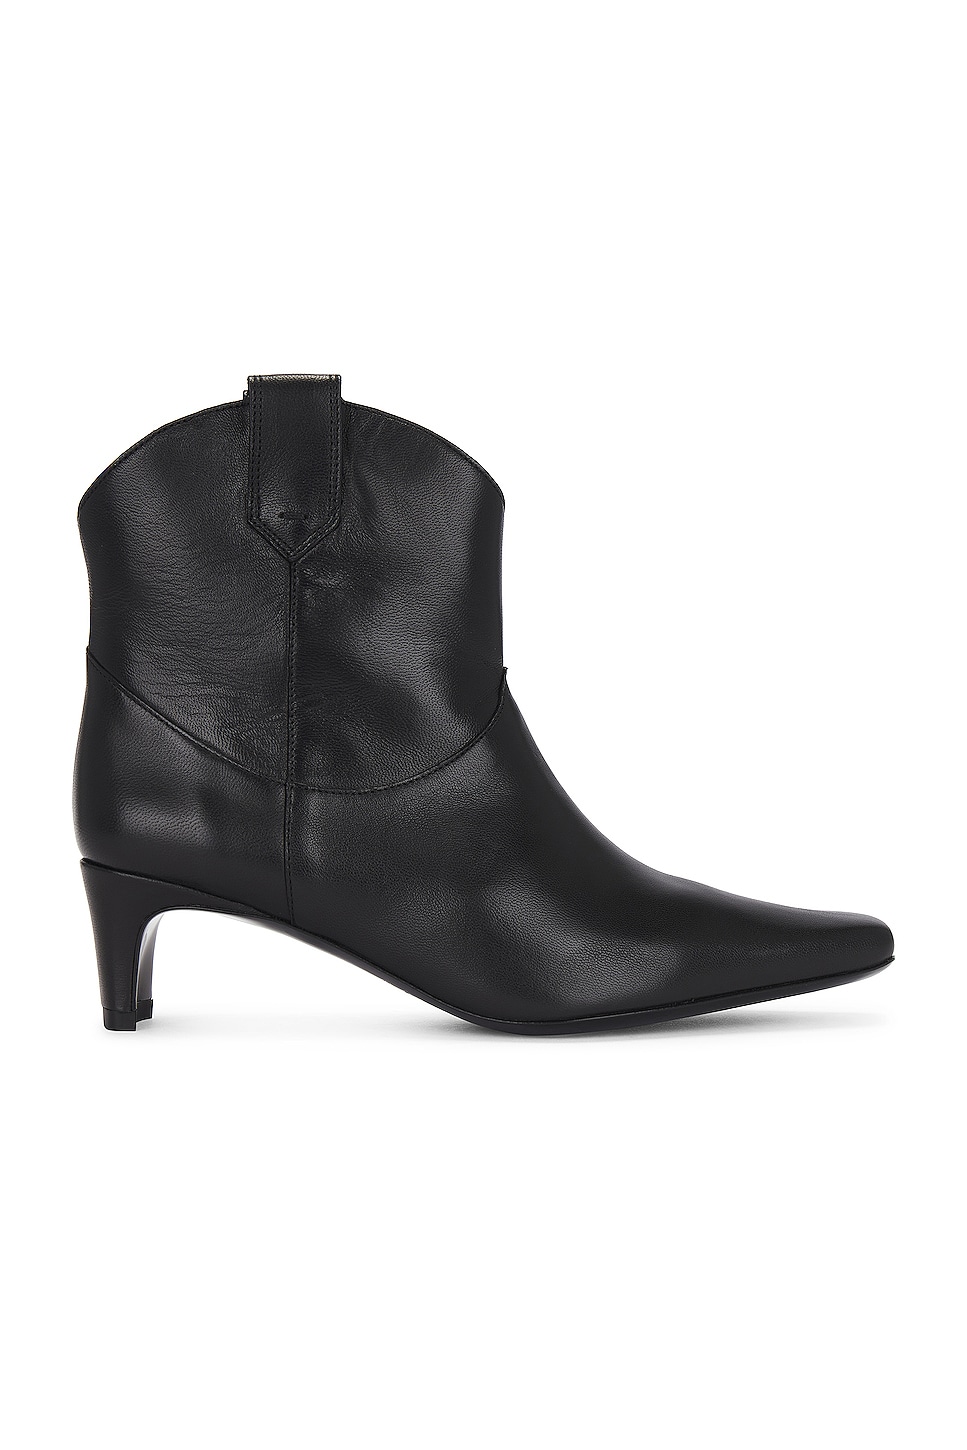 Image 1 of Staud Western Wally Ankle Boot in Black